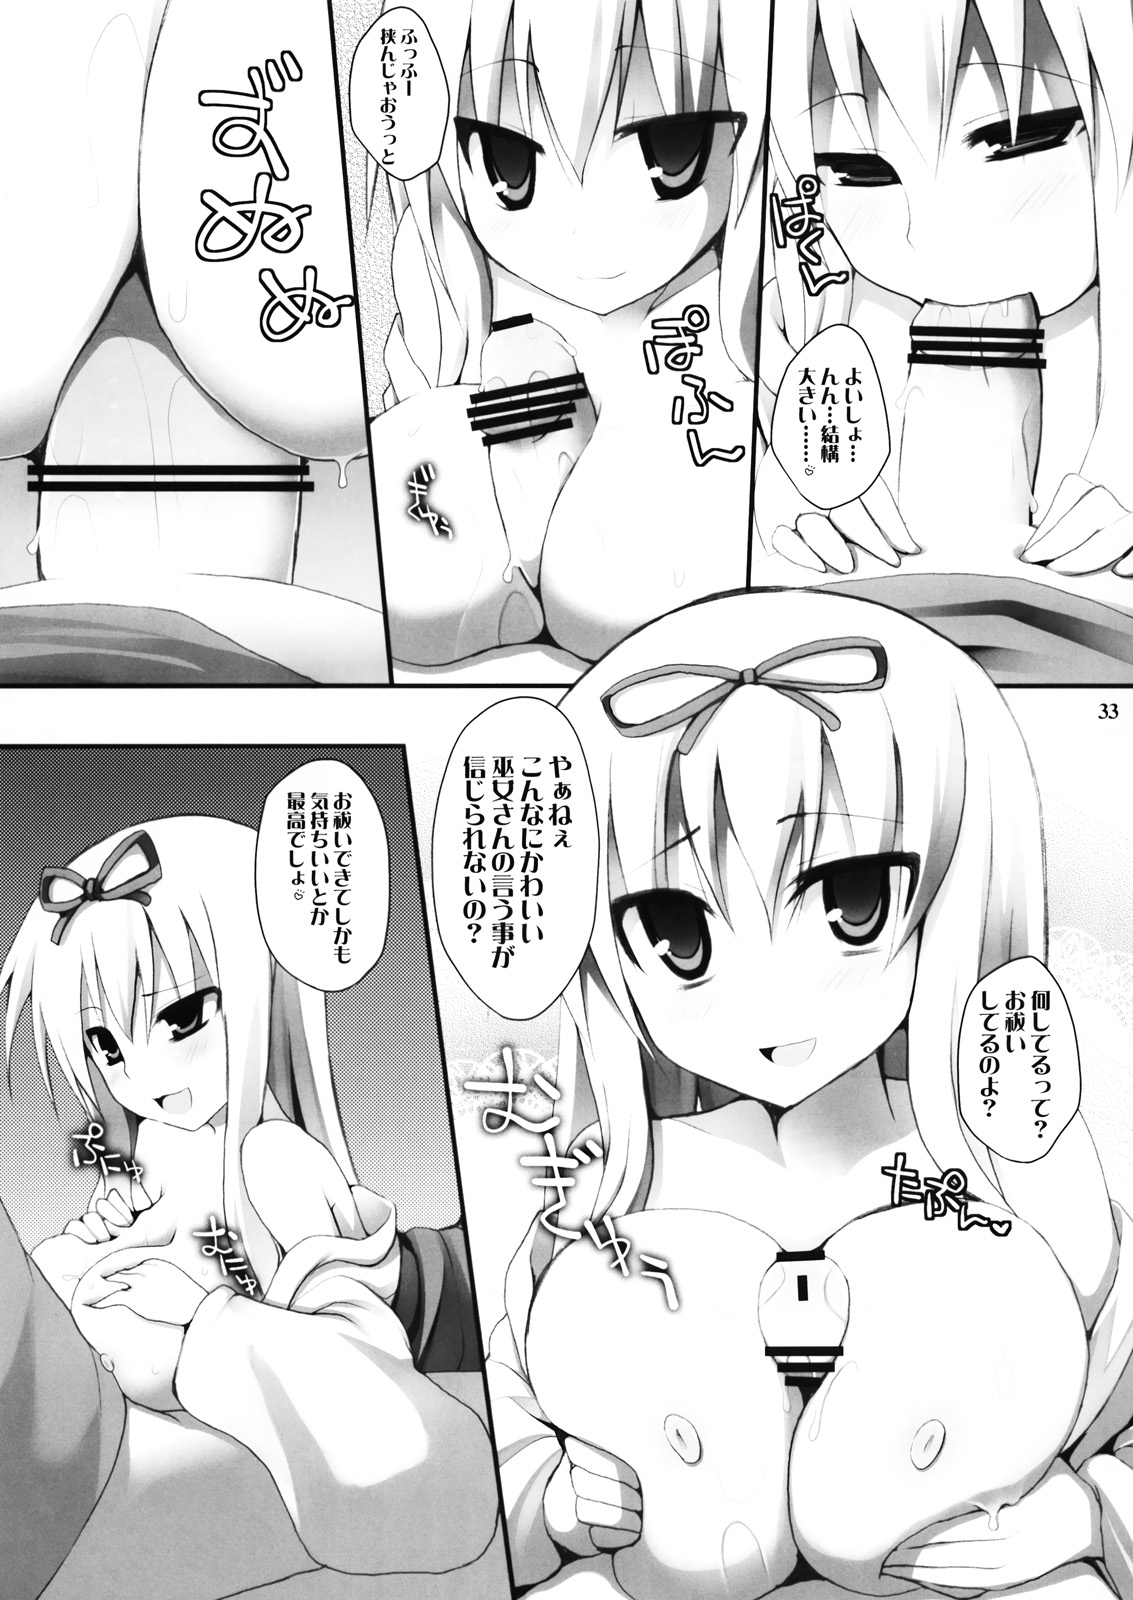 [Oppai Brothers] Gensoukyou Miko×Miko Zukan (Touhou Project) (例大祭8) [おっぱいぶらざーず (よろず)] 幻想郷巫女×巫女図鑑 (東方Project)